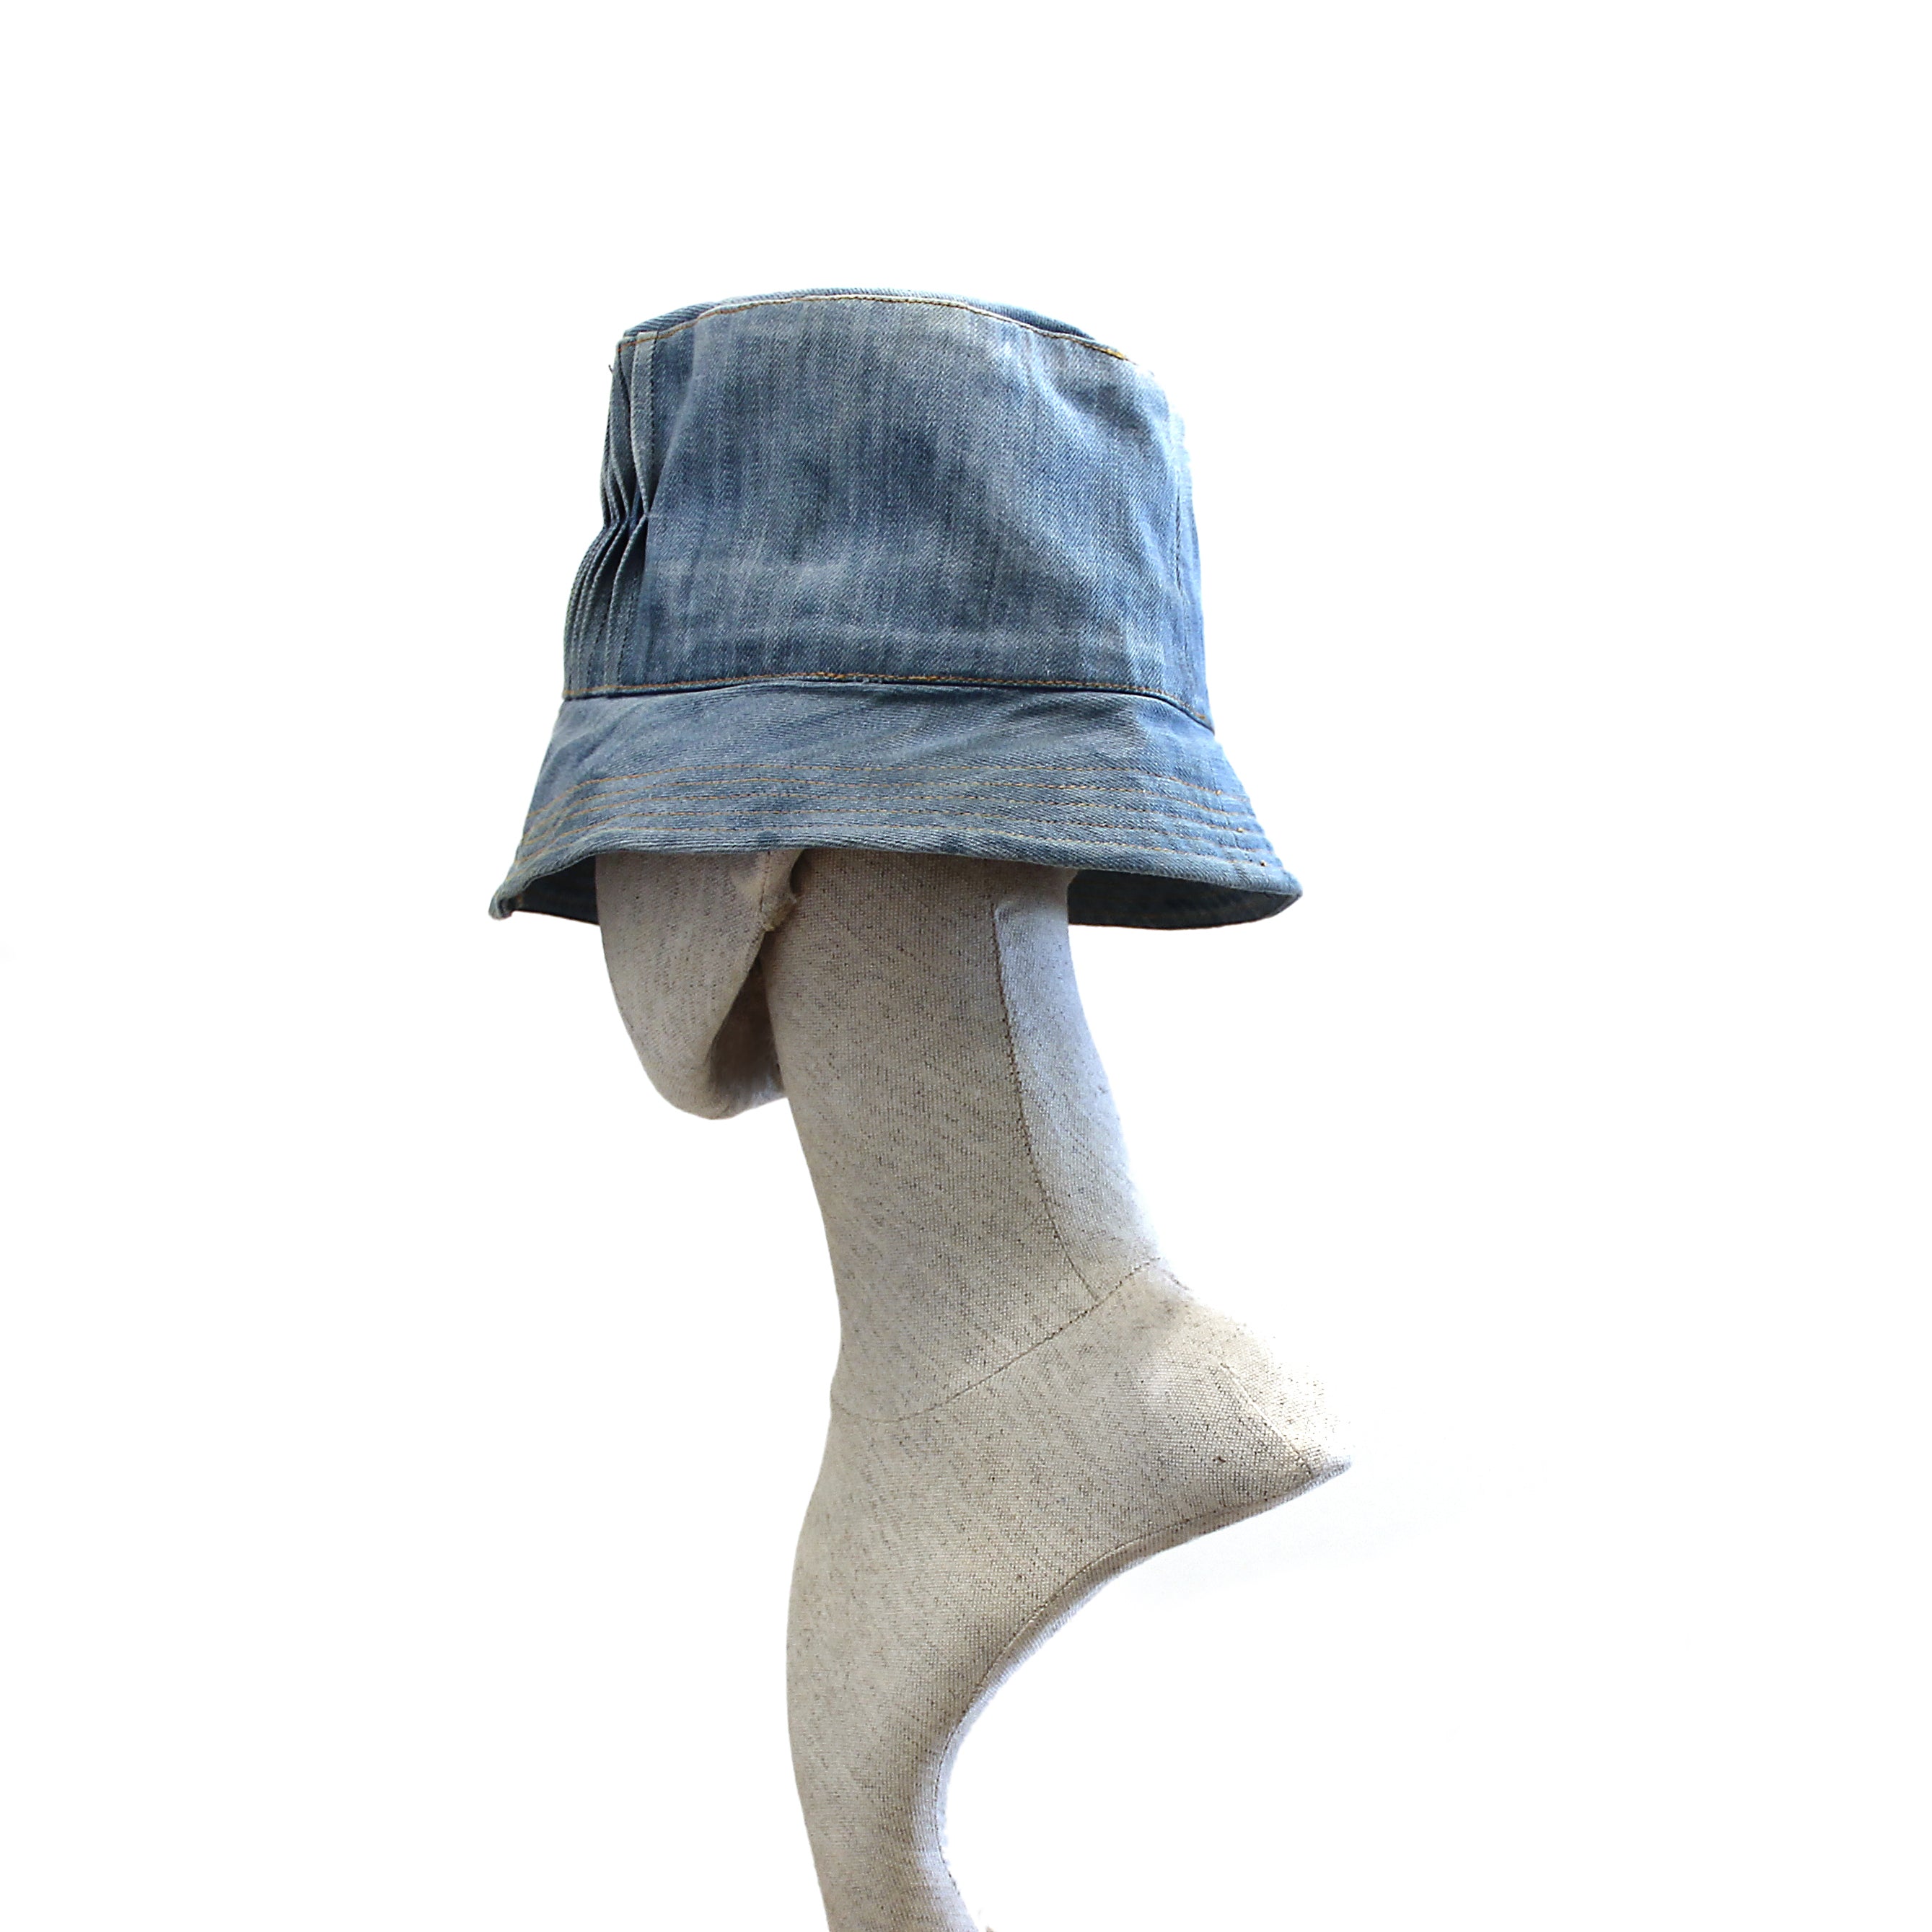 Bucket hat with Gills